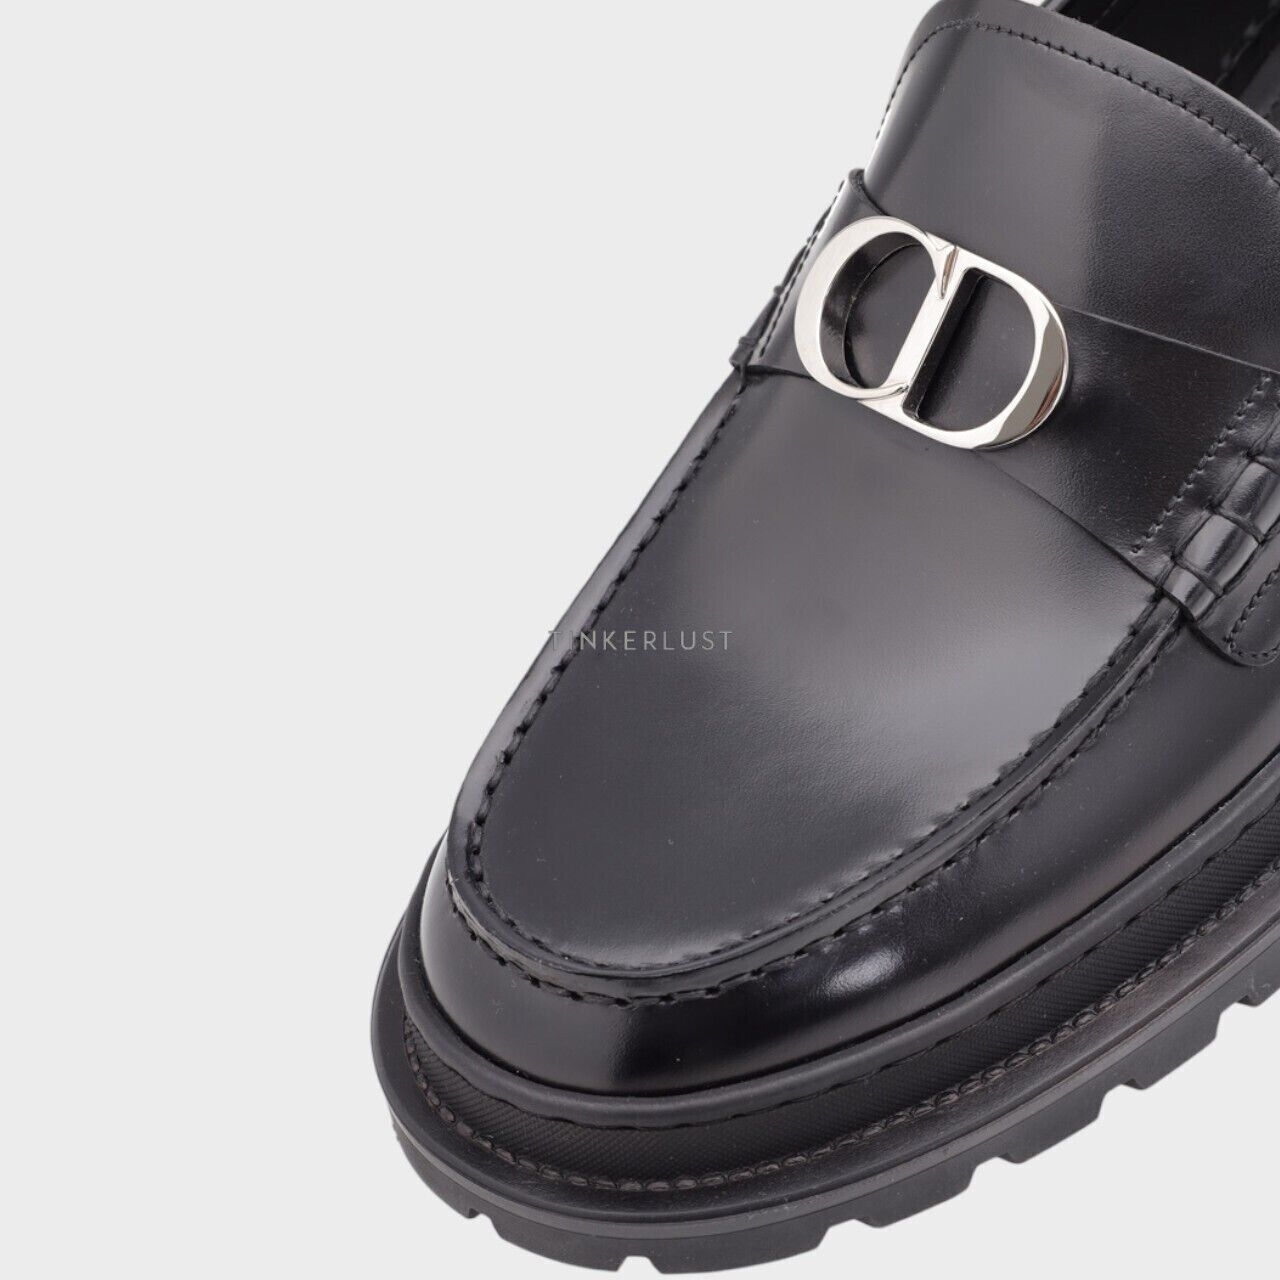 Christian Dior Dior Explorer Loafers in Black Smooth Calfskin Oxford